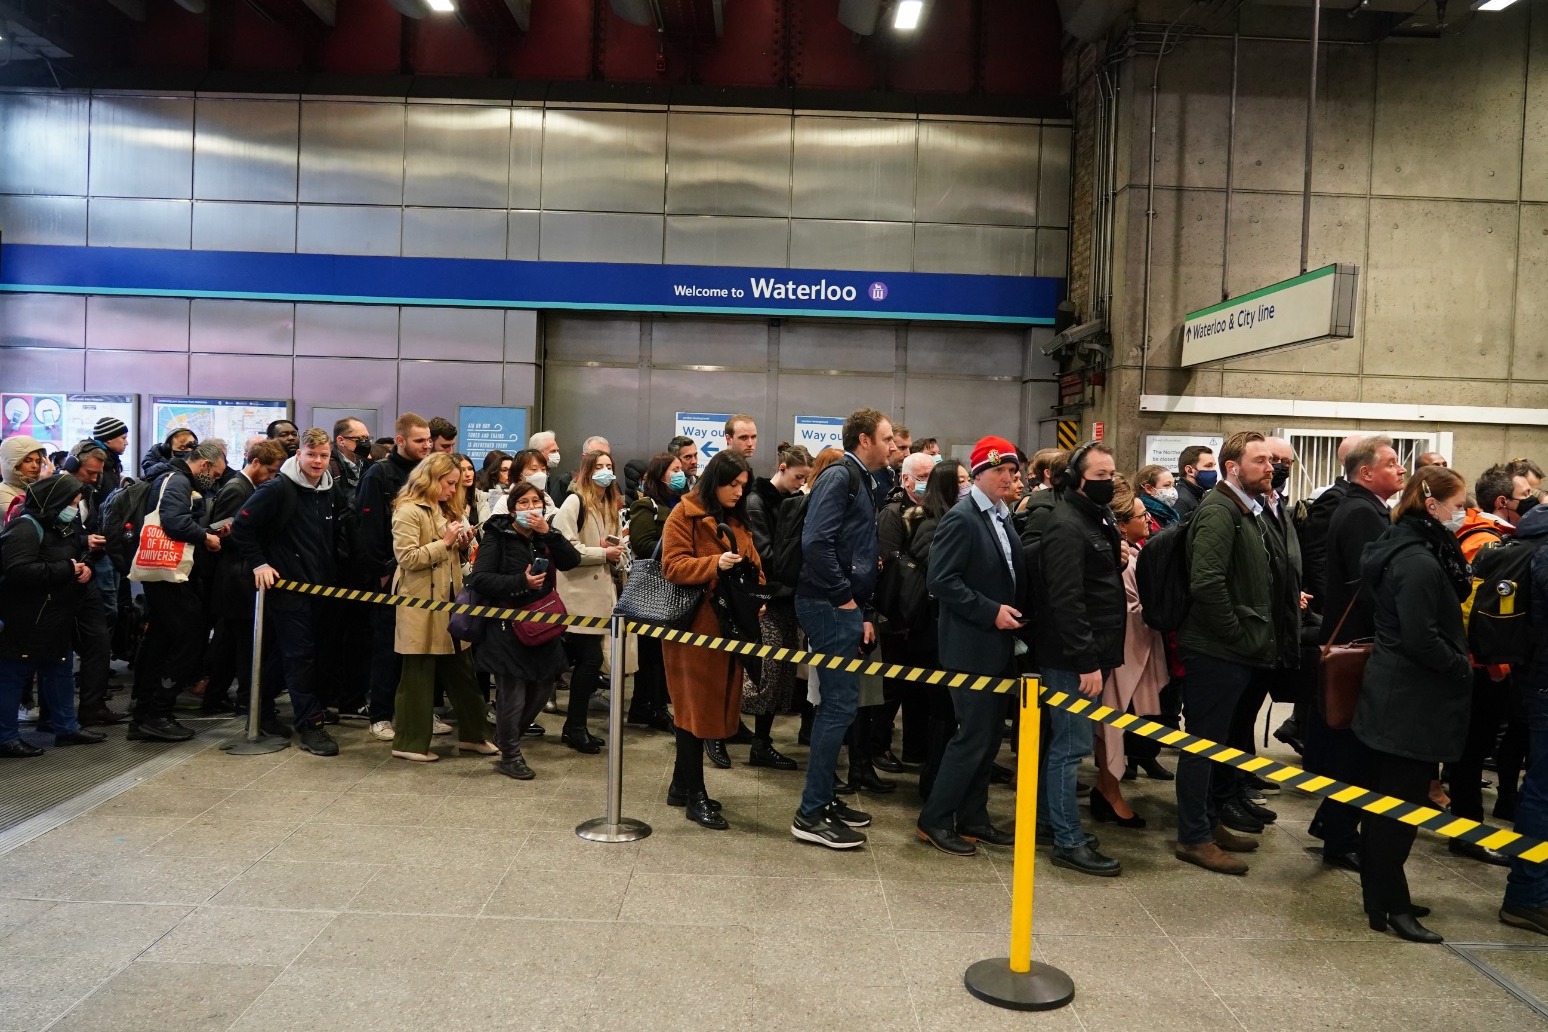 Tube disruption continues after strike 